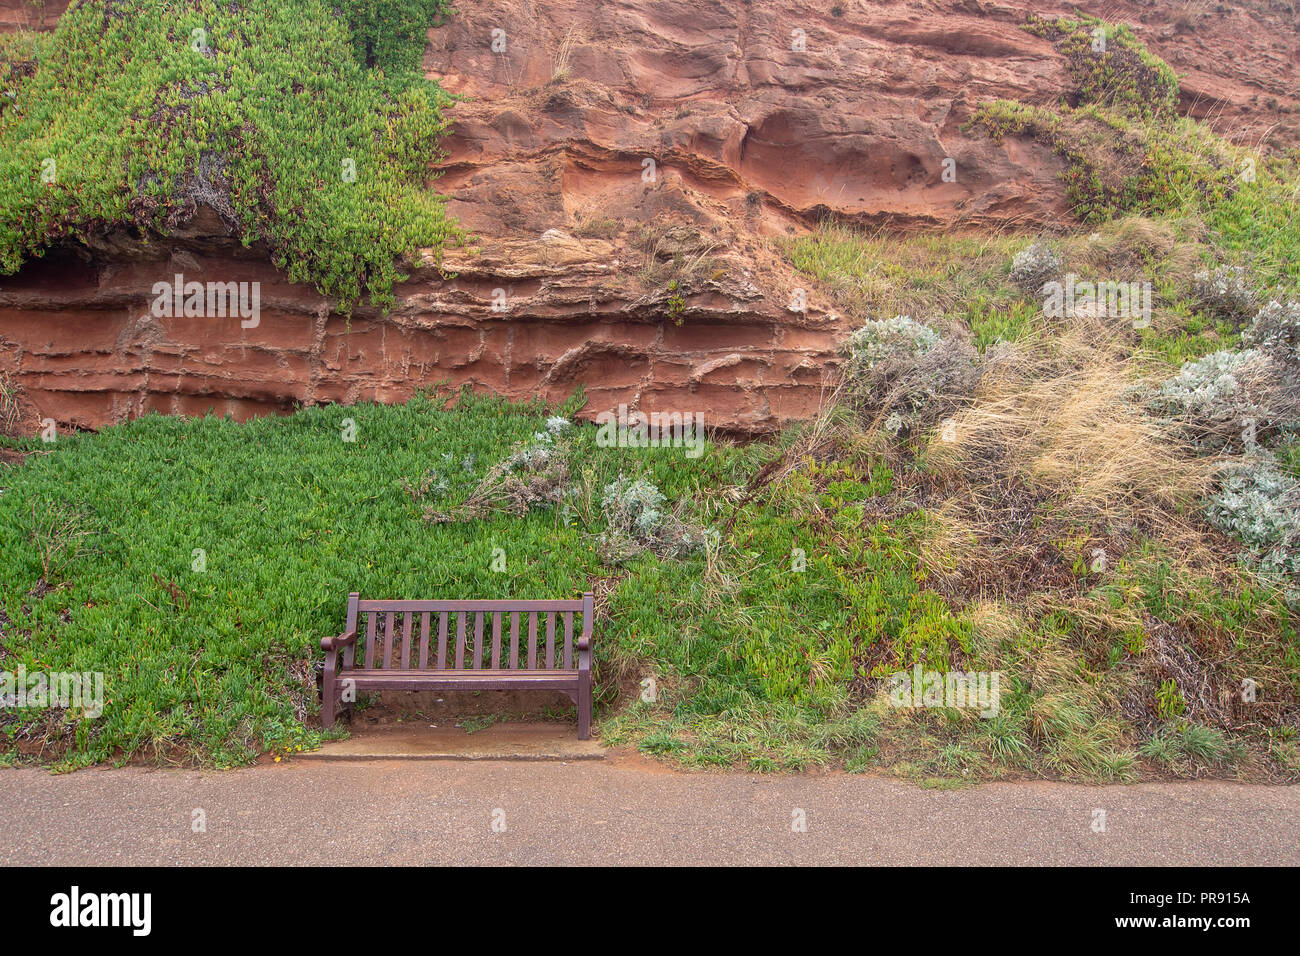 Erosion and fossilised roots in the red sandstone coastal cliffs at Budleigh Salterton, Devon, UK. Stock Photo